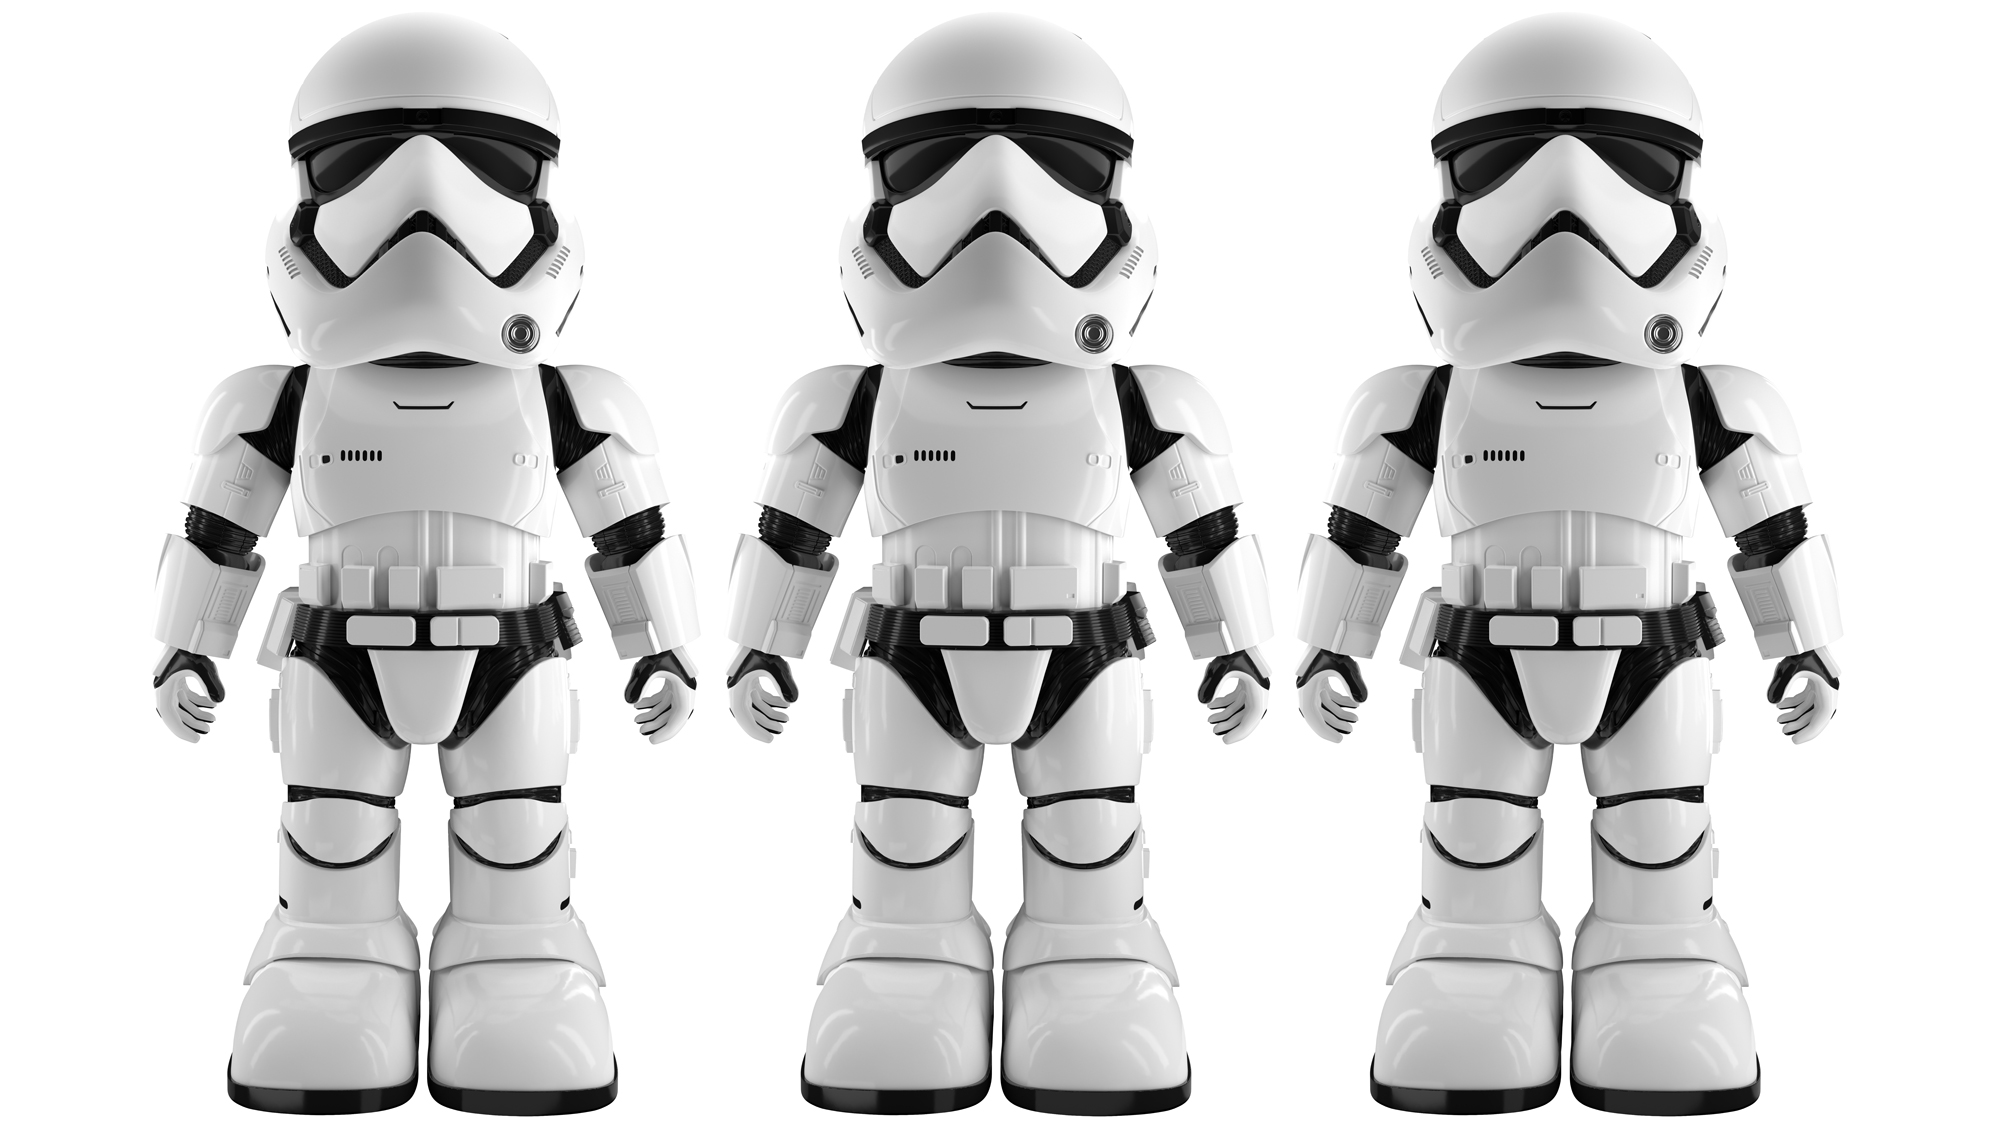 You Can Amass Your Own Army Of Tiny, Robotic Stormtroopers